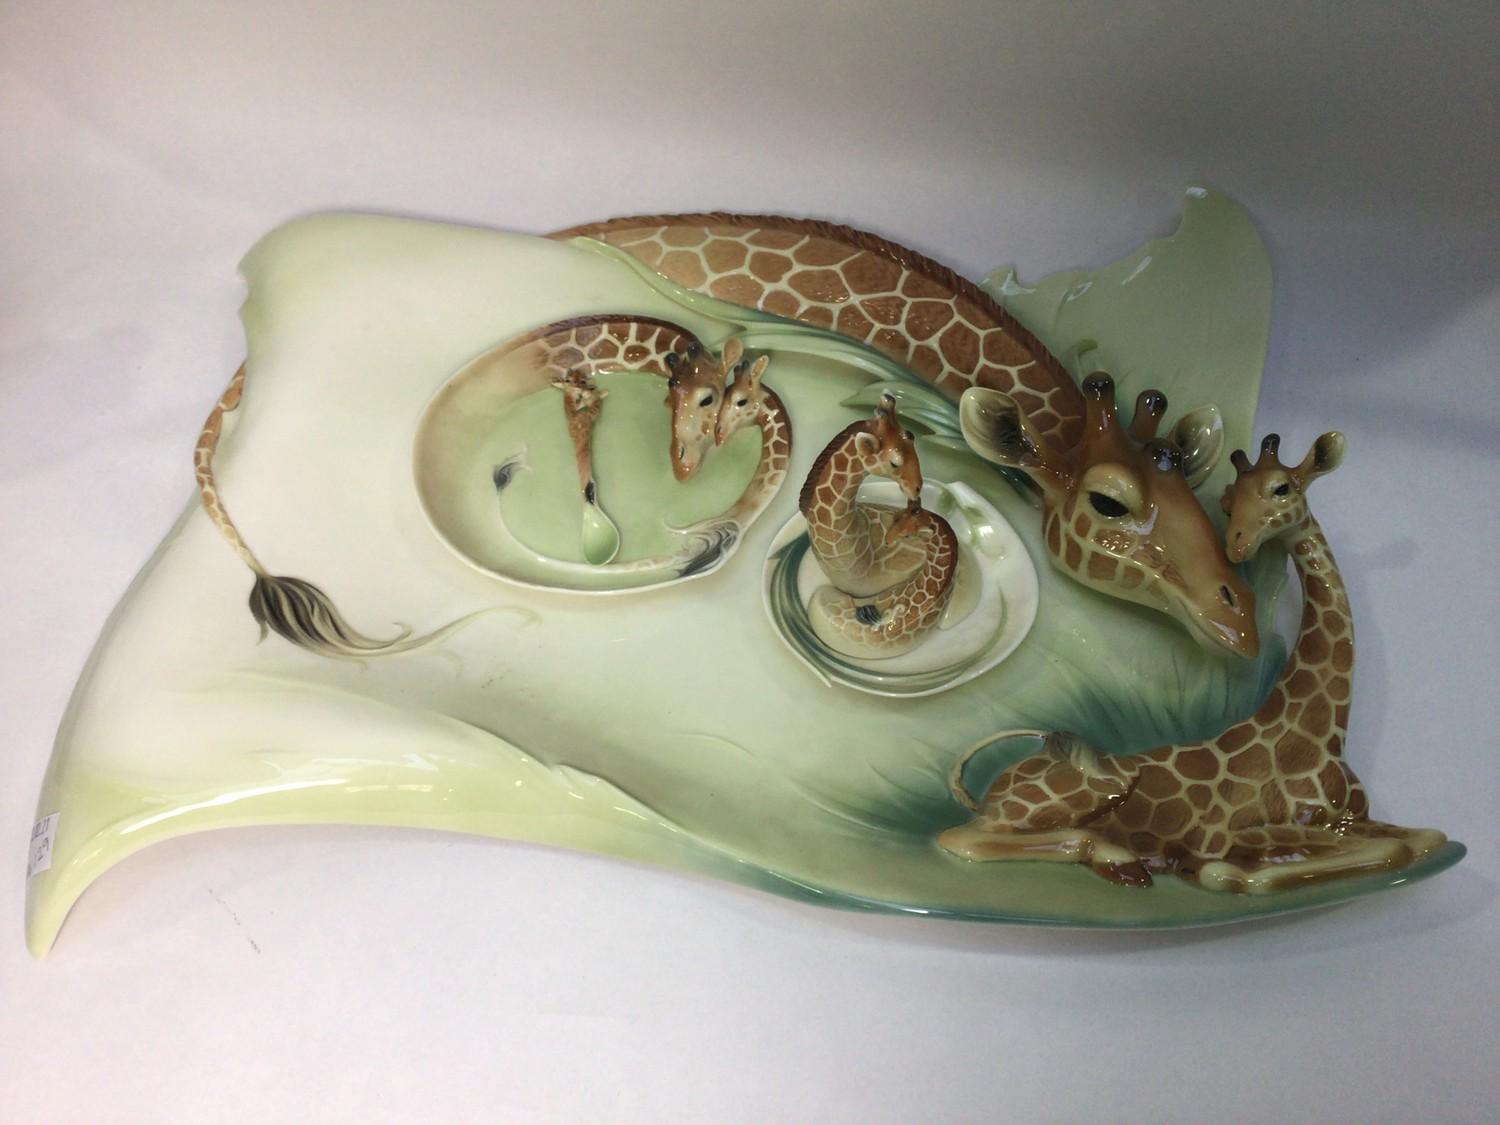 A large 20th century ceramic serving platter with relief giraffe and calf by Franz, limited